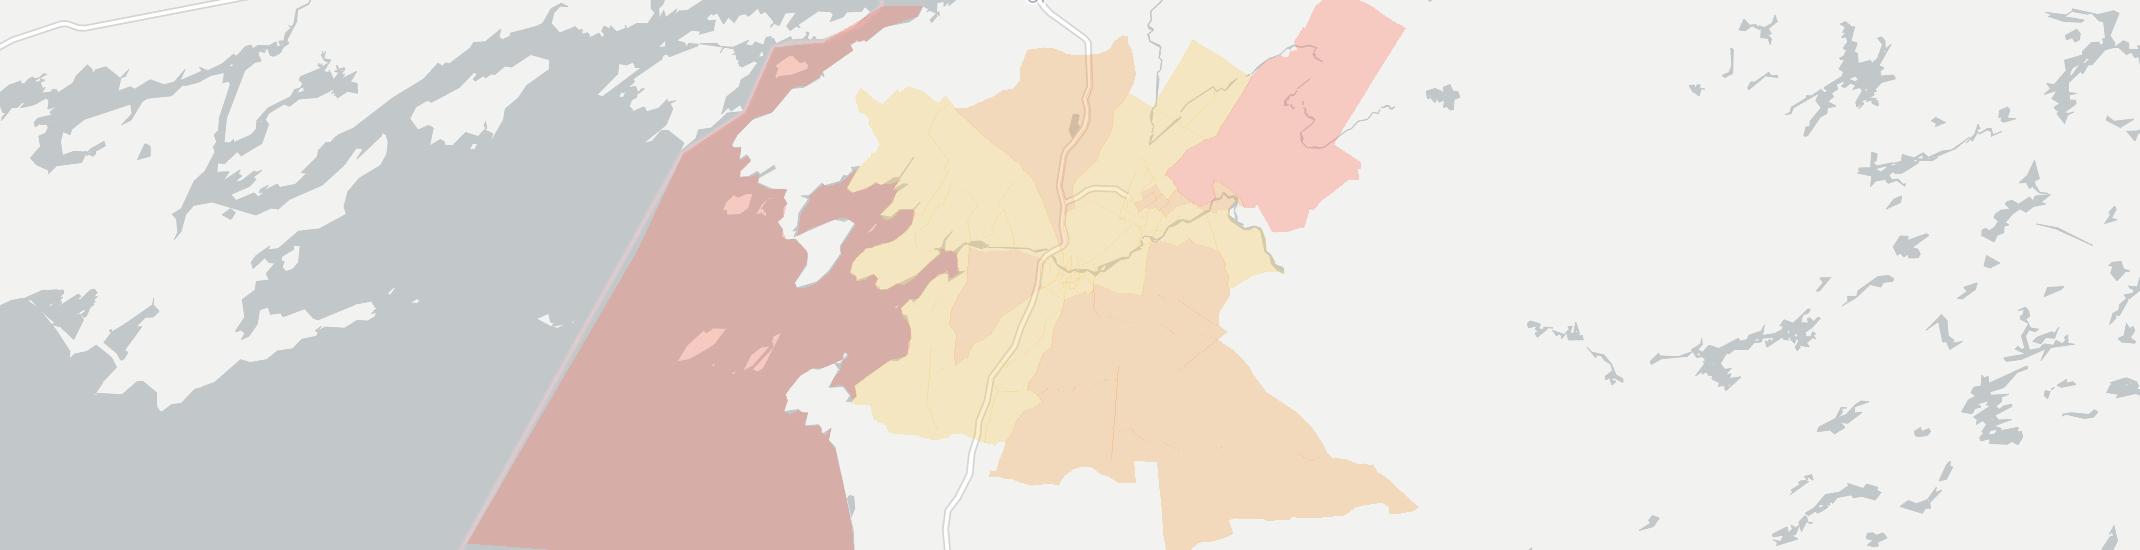 Watertown Internet Competition Map. Click for interactive map